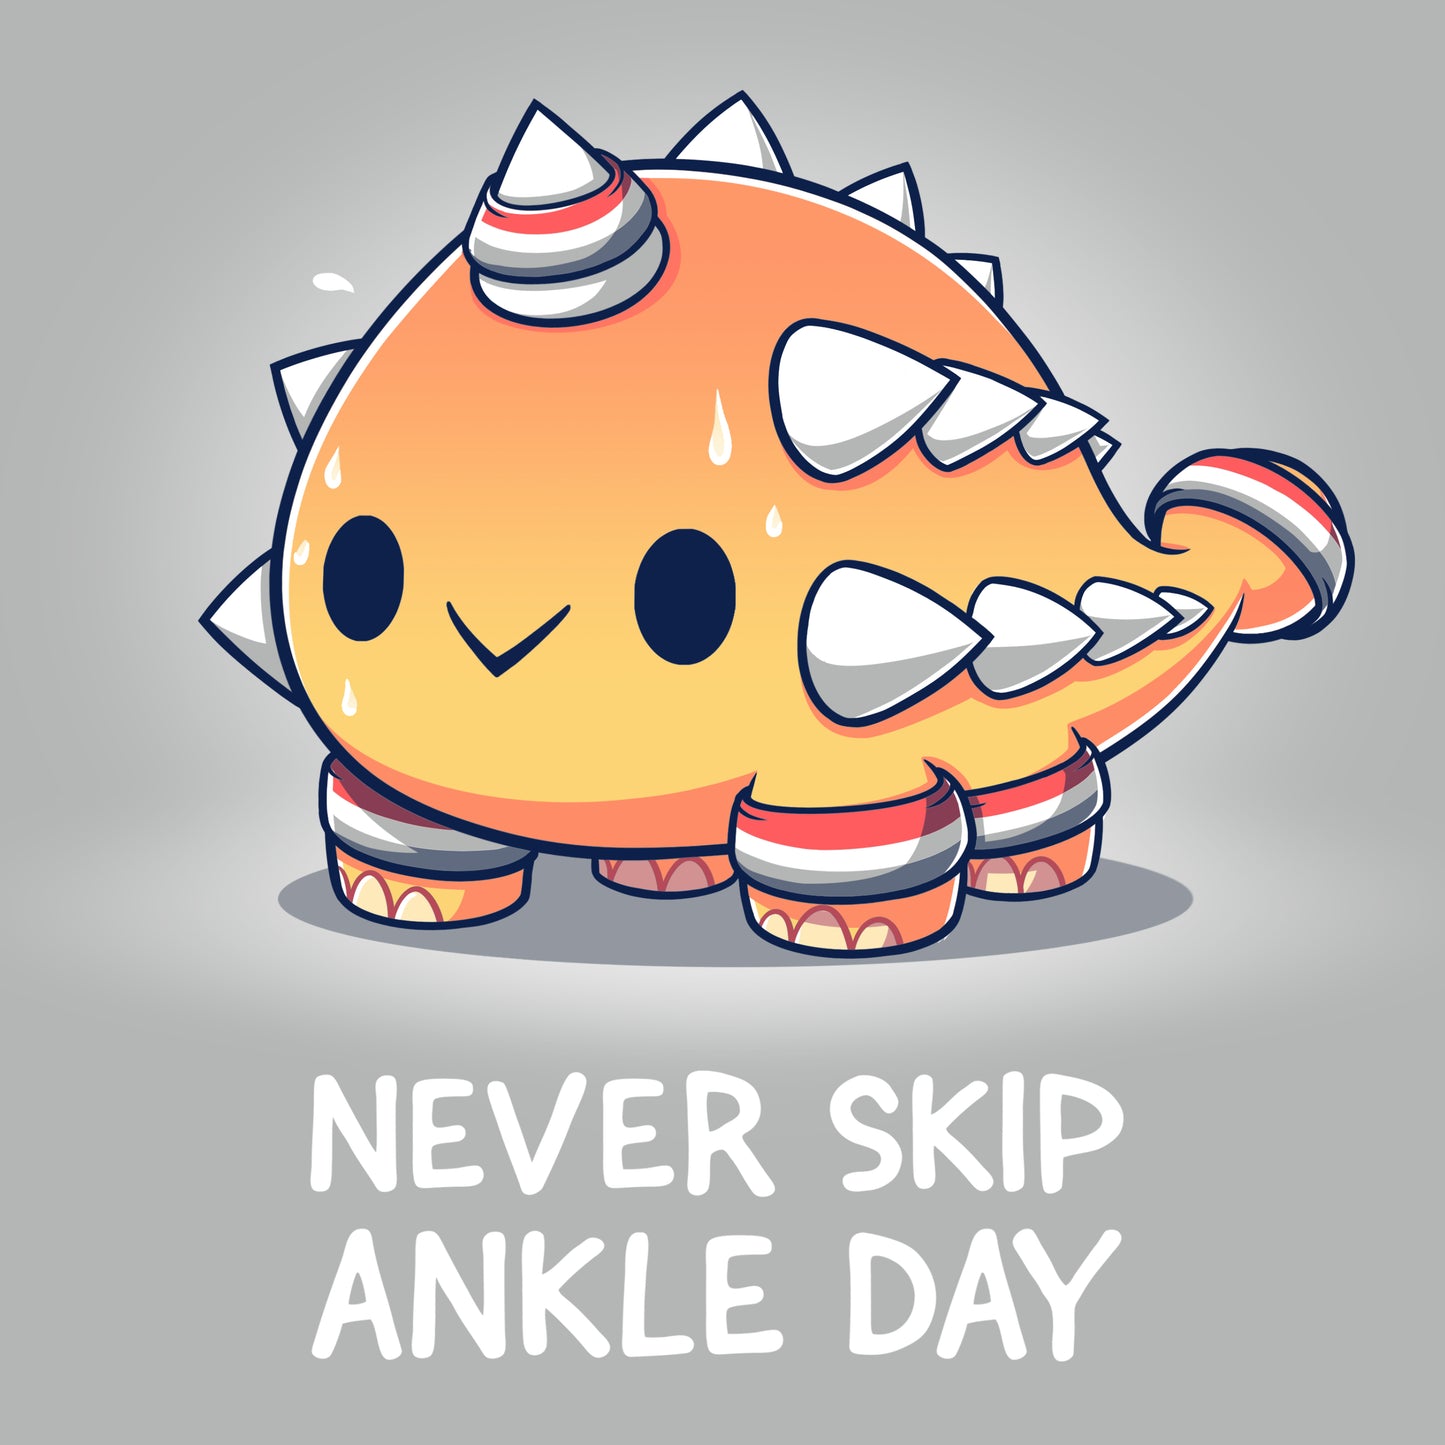 Gray t-shirt featuring the product "Never Skip Ankle Day" by the brand TeeTurtle.